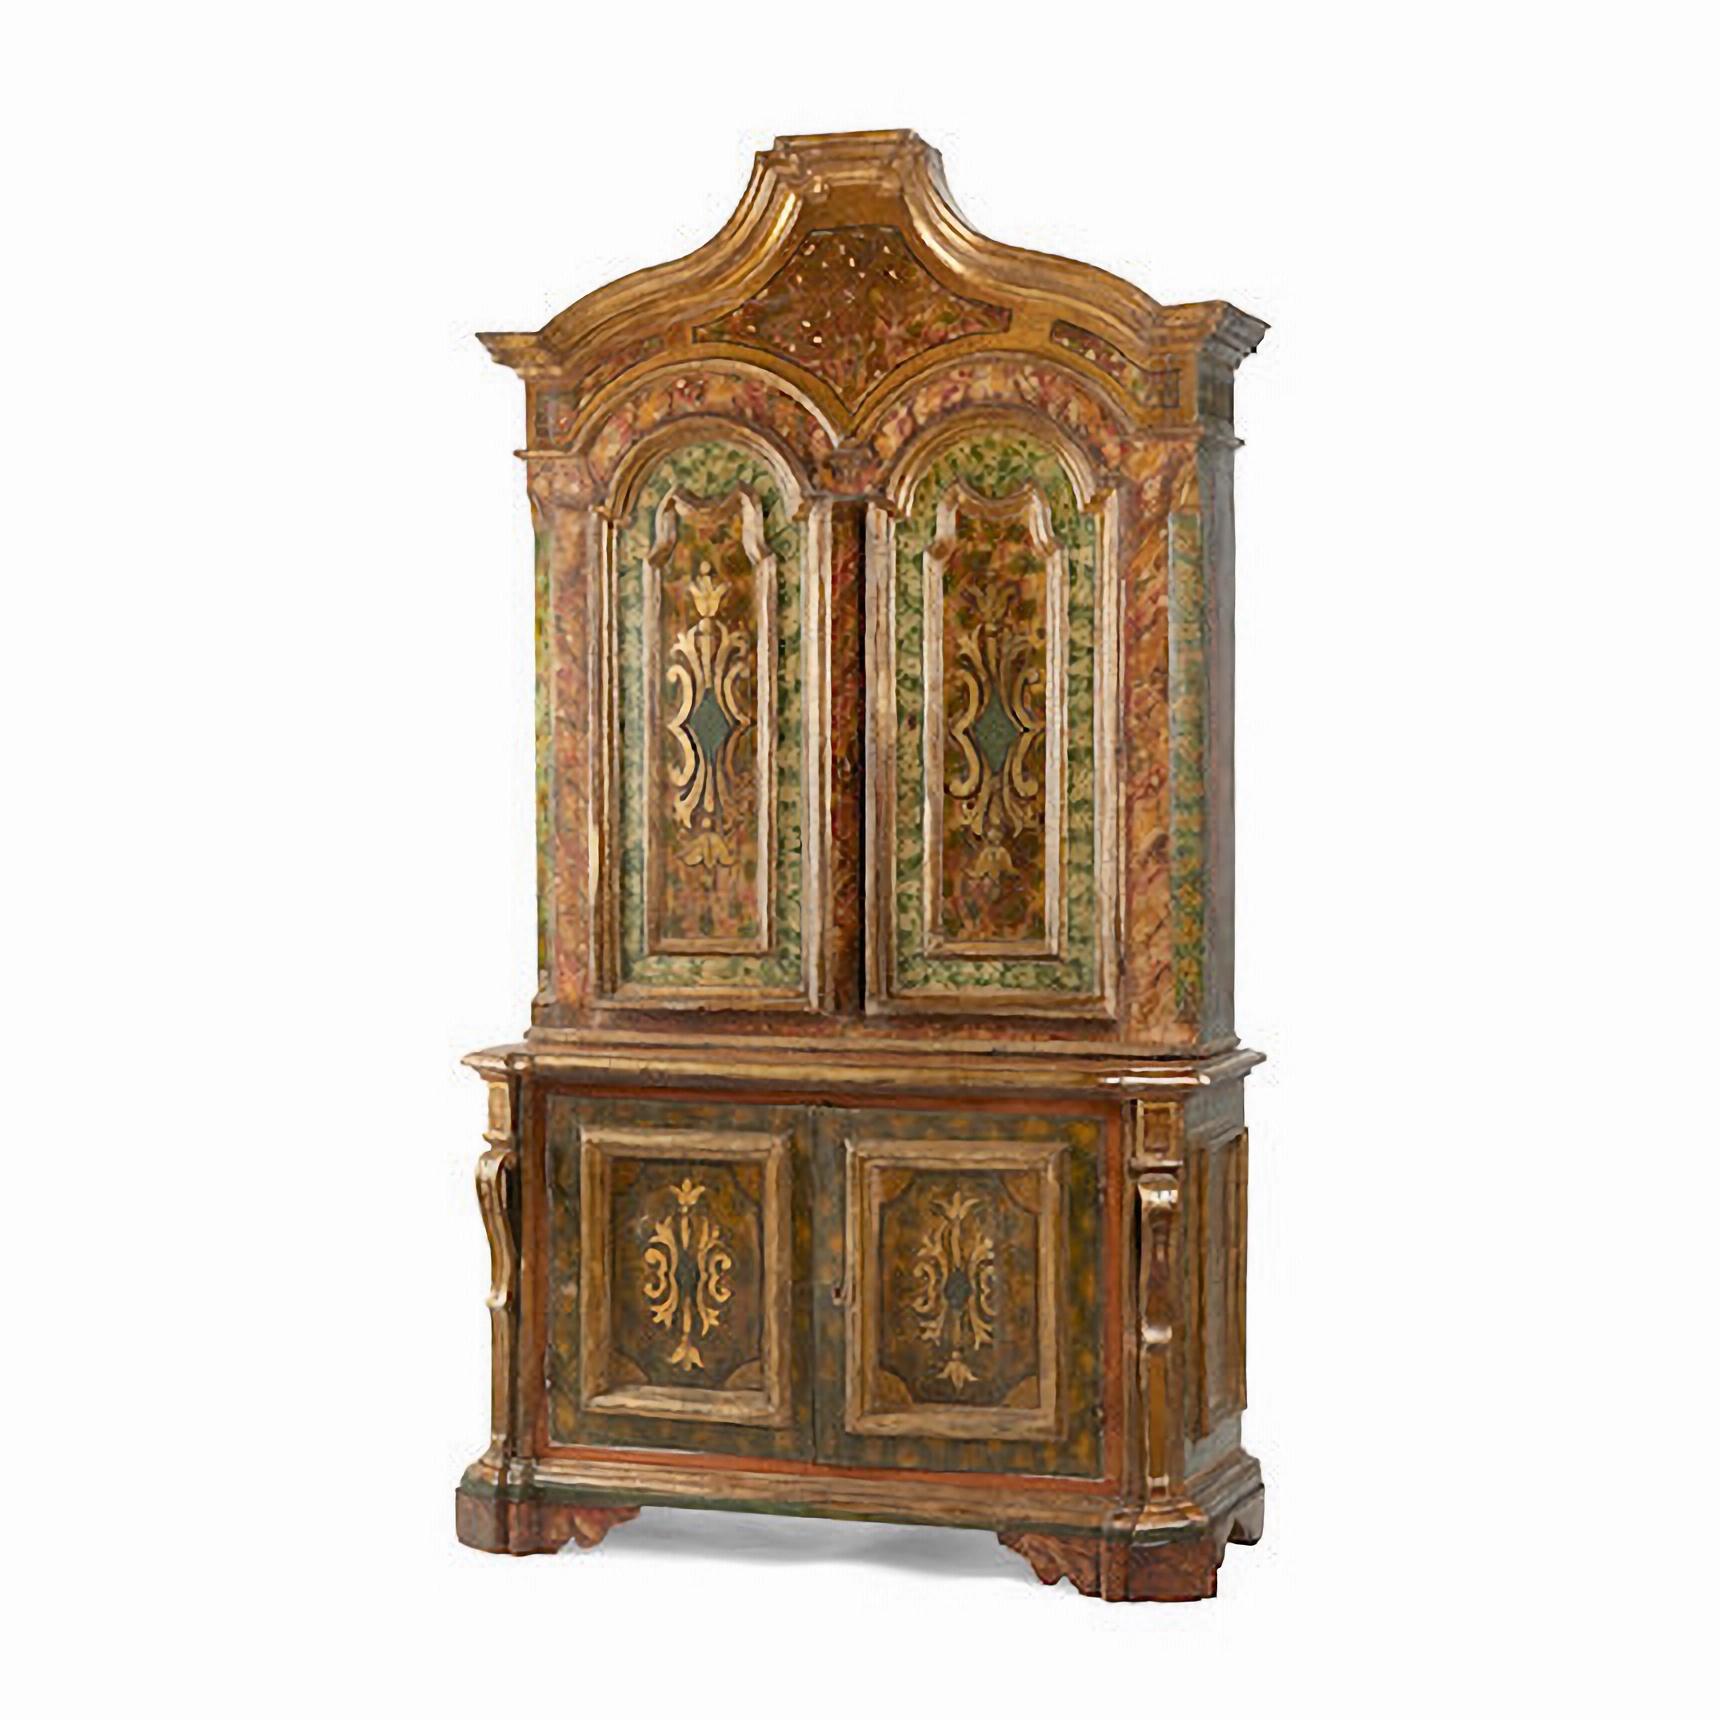 A French Baroque Style Painted and Parcel Gilt Buffet a Deux Corps, 18th Century

The graduated and shaped cornice over a pair of arch doors with raised cartouche panels of foliate design doors, opening to three internal shelves, the lower pair of